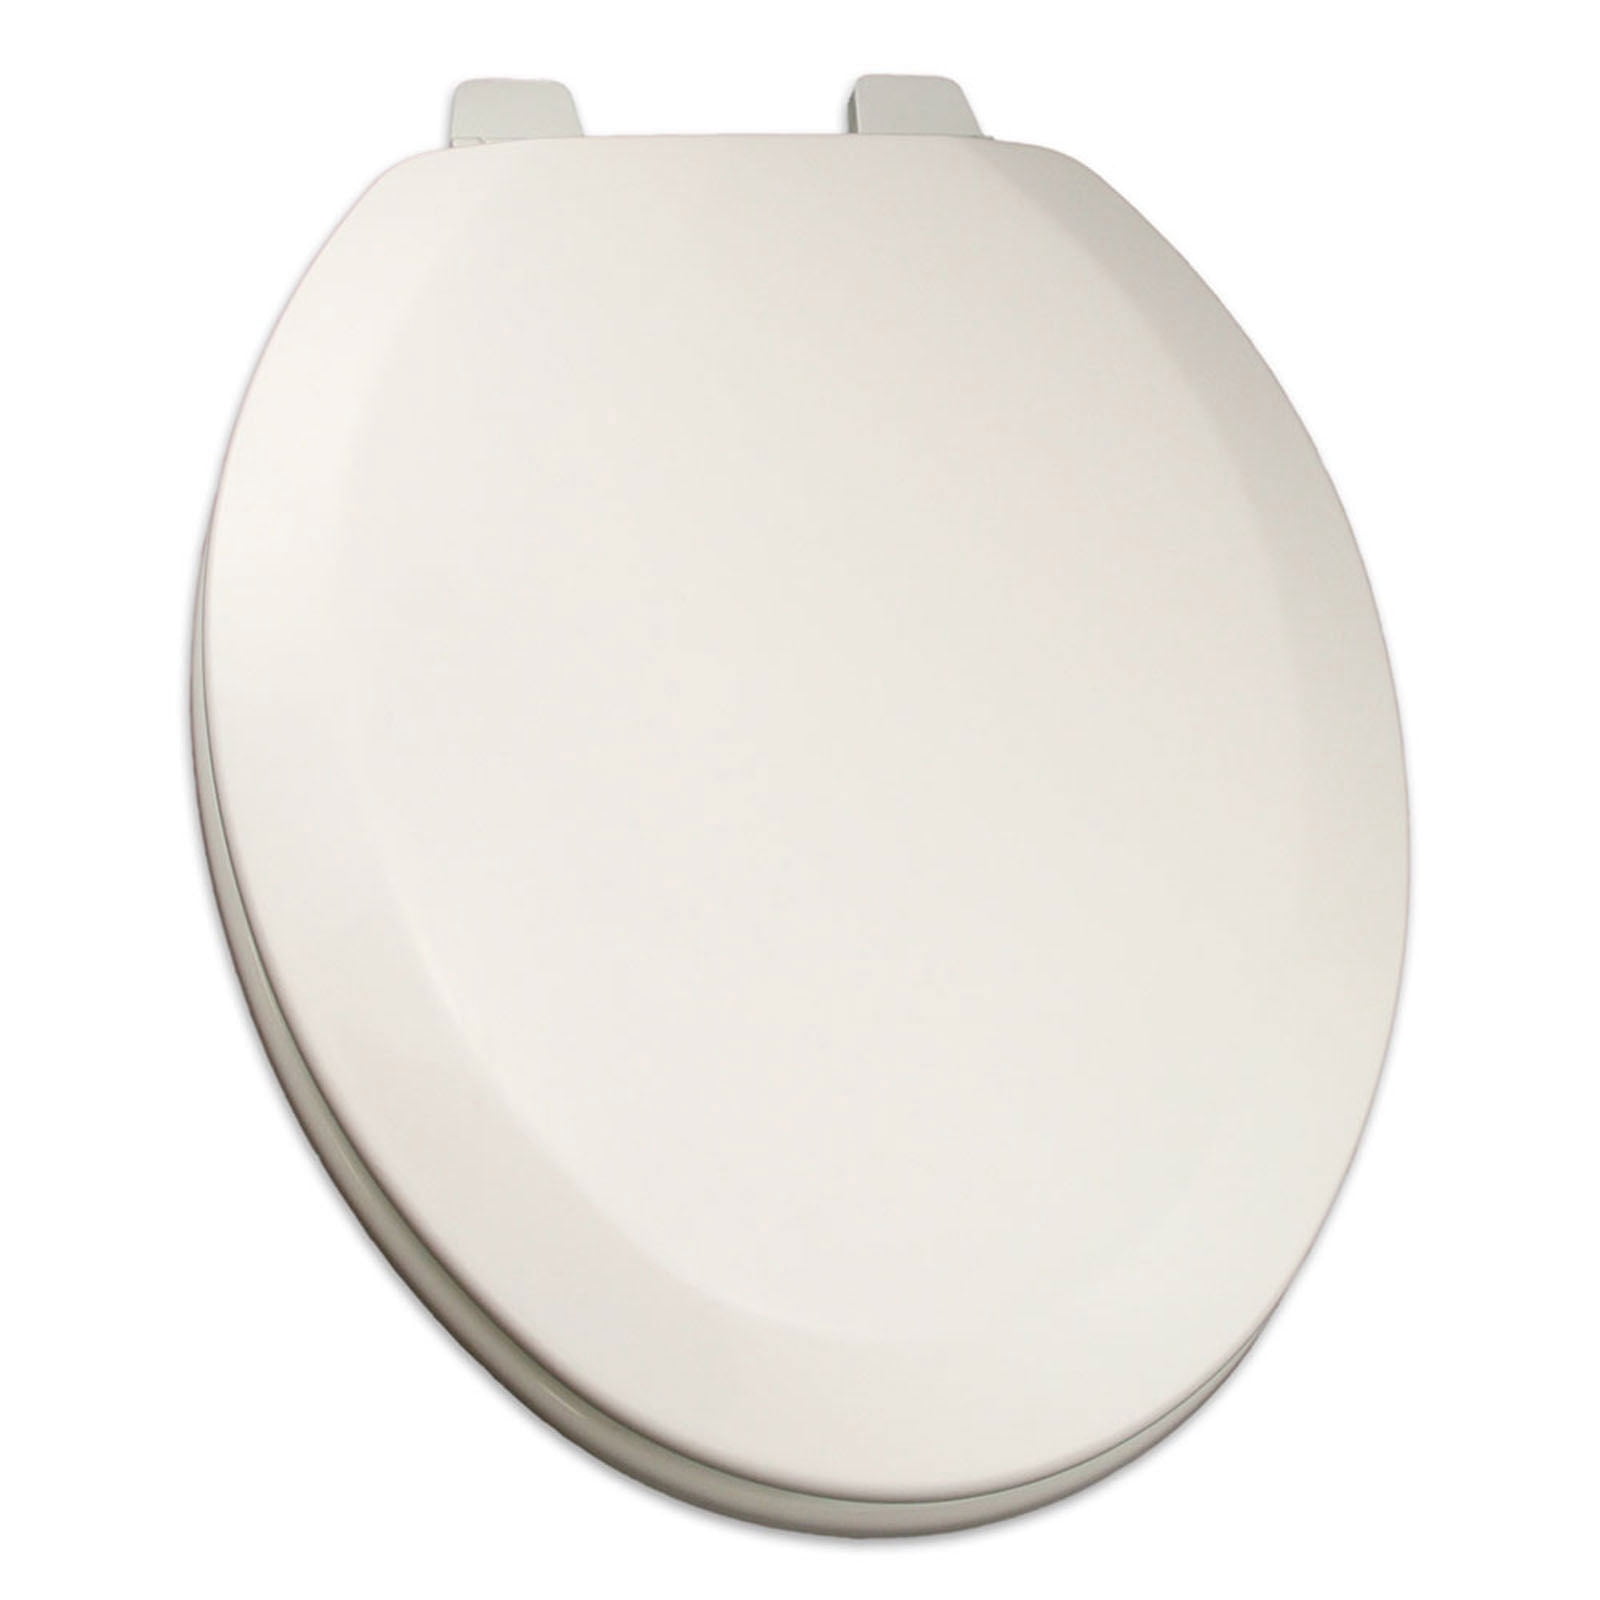 NEW PINE EFFECT TOILET SEAT WOODEN EFFECT CHROME PLATED HINGES BATHROOM BATH 